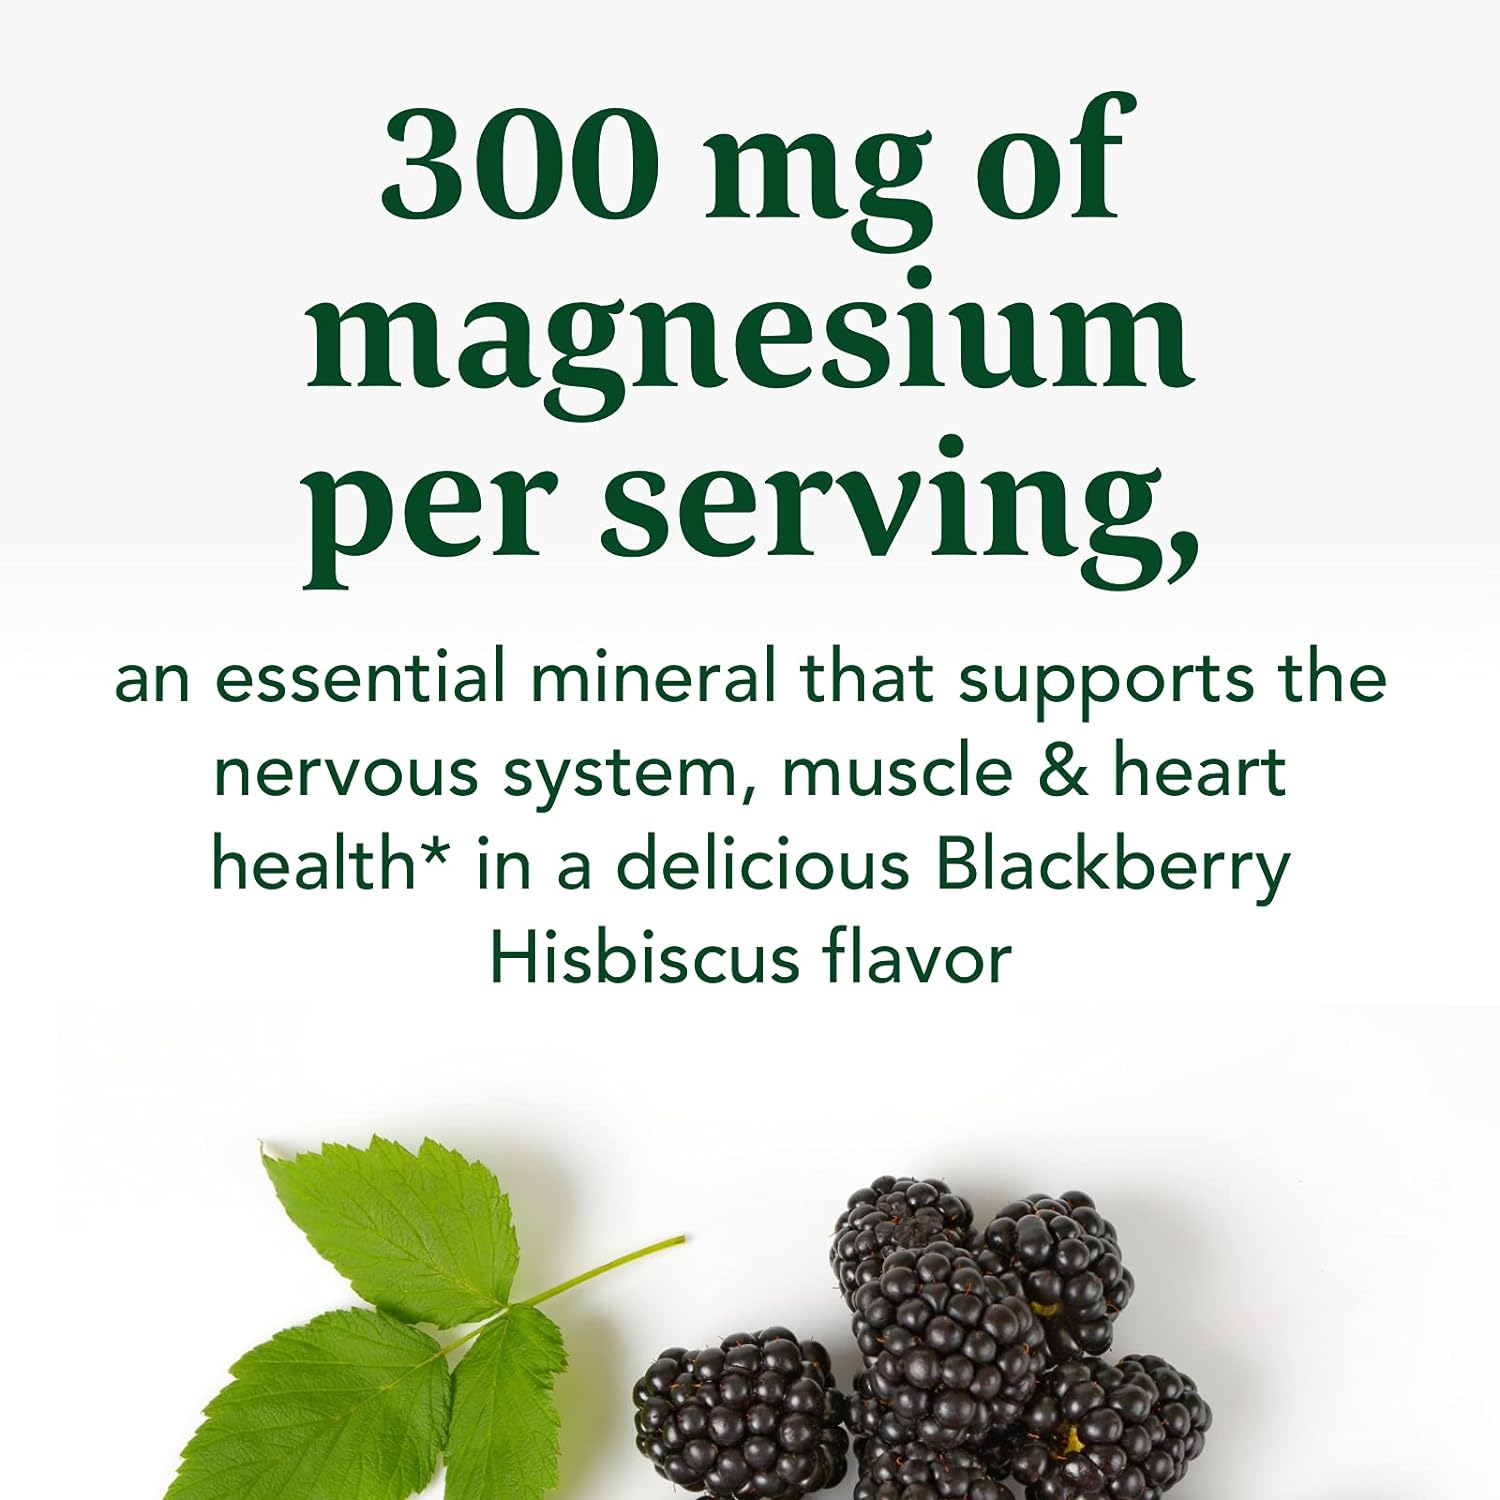 MegaFood Relax + Calm Magnesium Powder - Highly Absorbable Magnesium G